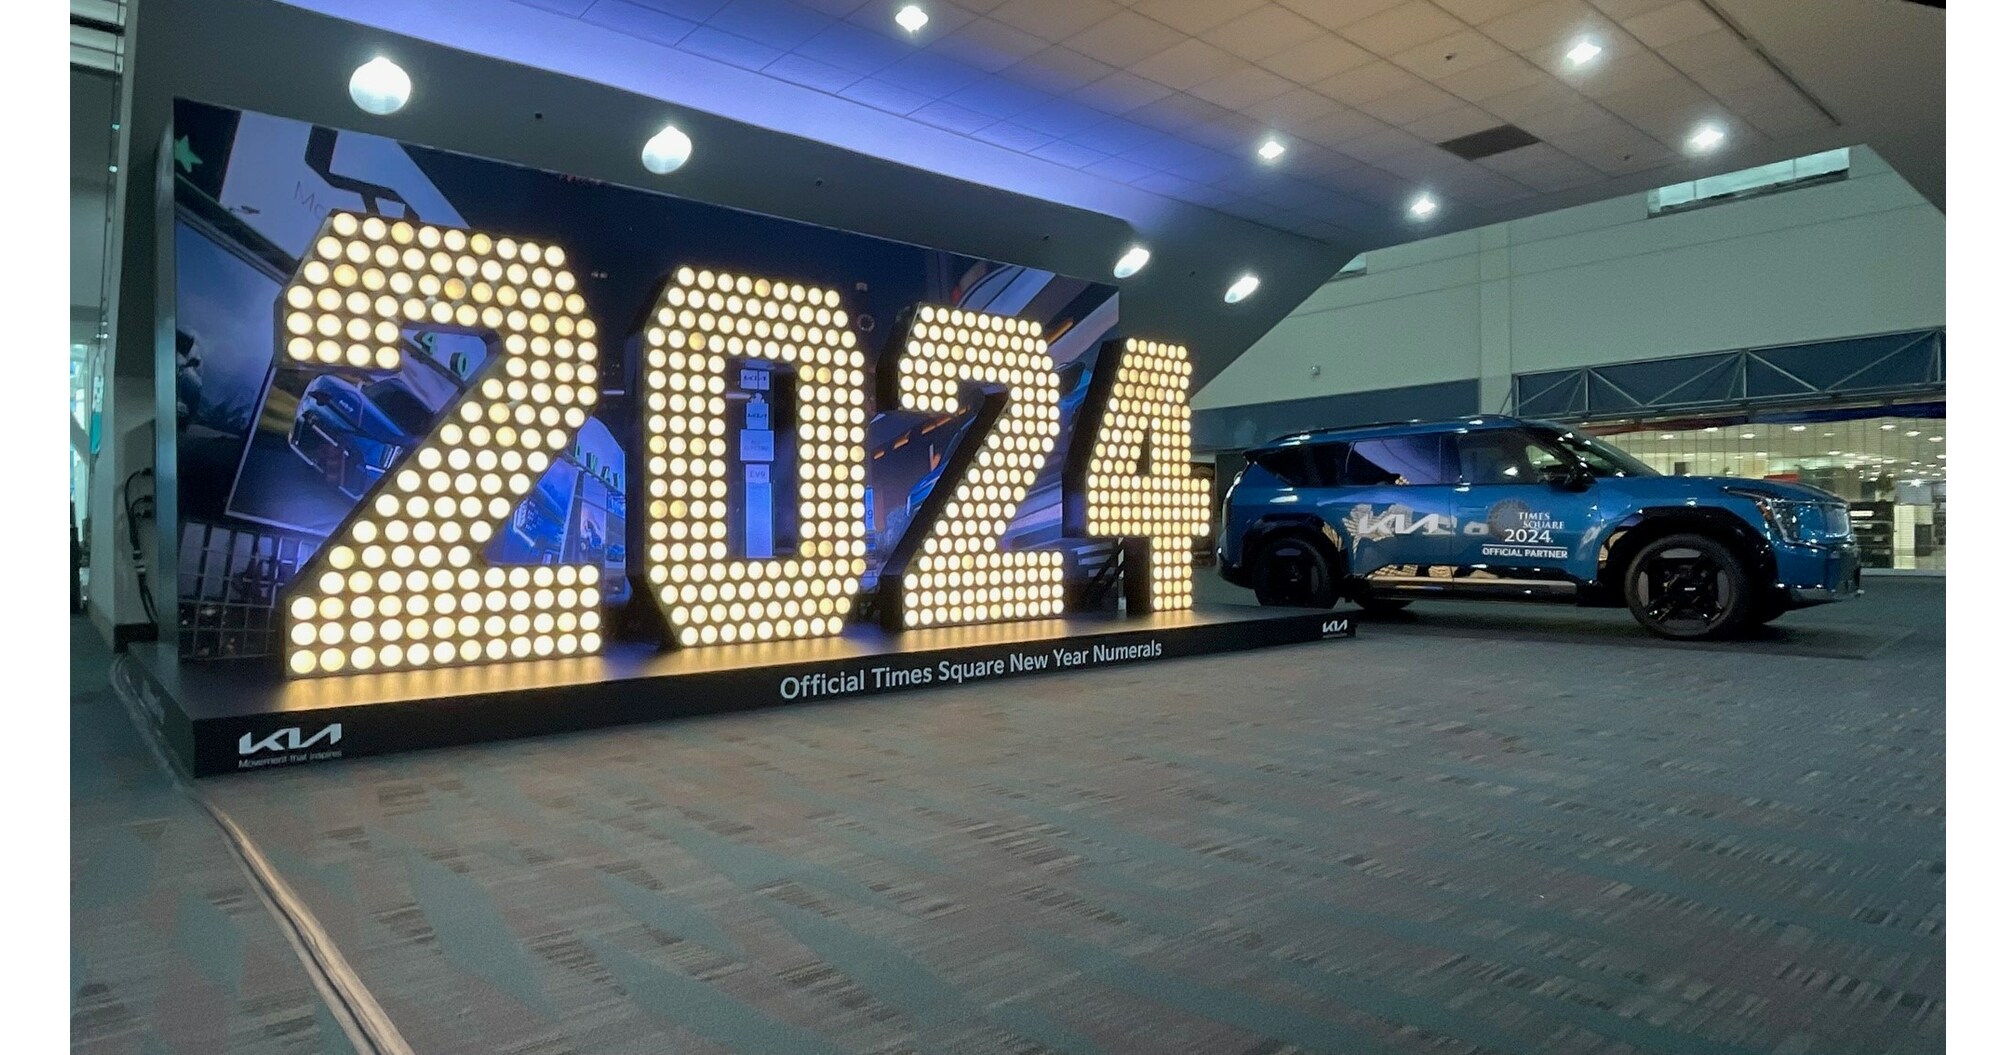 KIA AMERICA READY TO RING IN 2024 WITH NATIONWIDE TOUR OF ICONIC TIMES